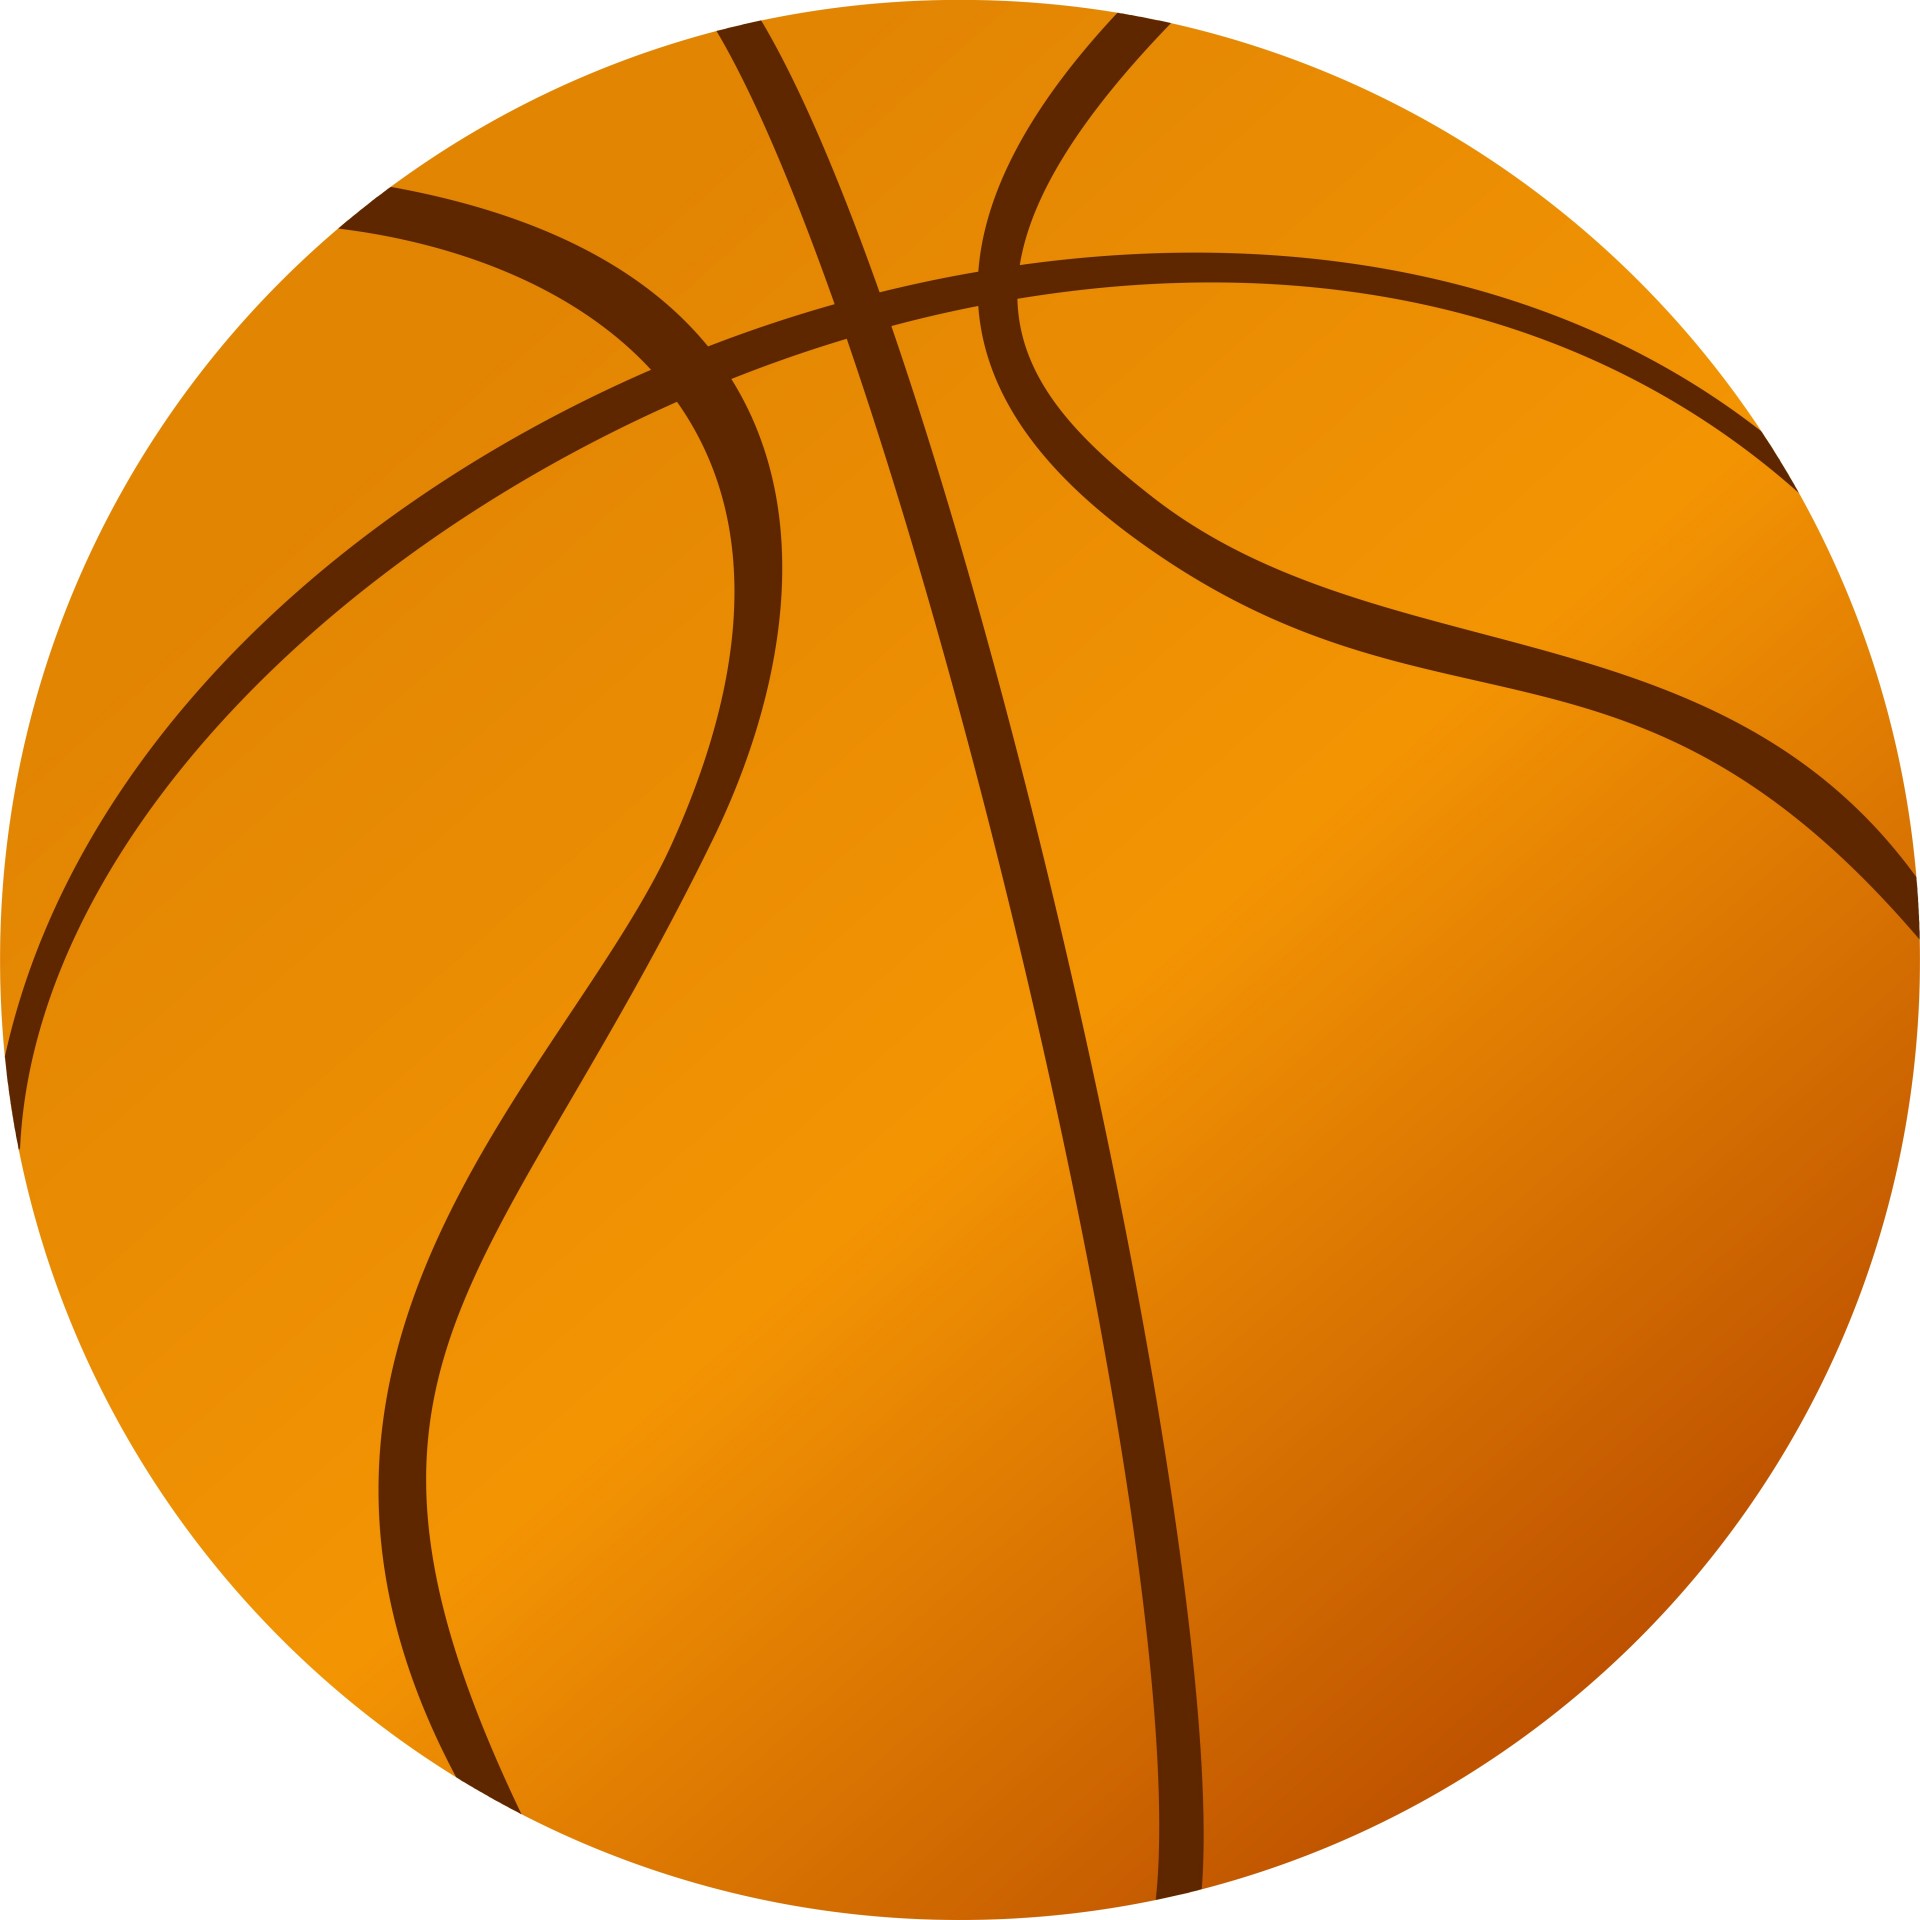 4-best-images-of-basketball-paper-printable-free-printable-basketball